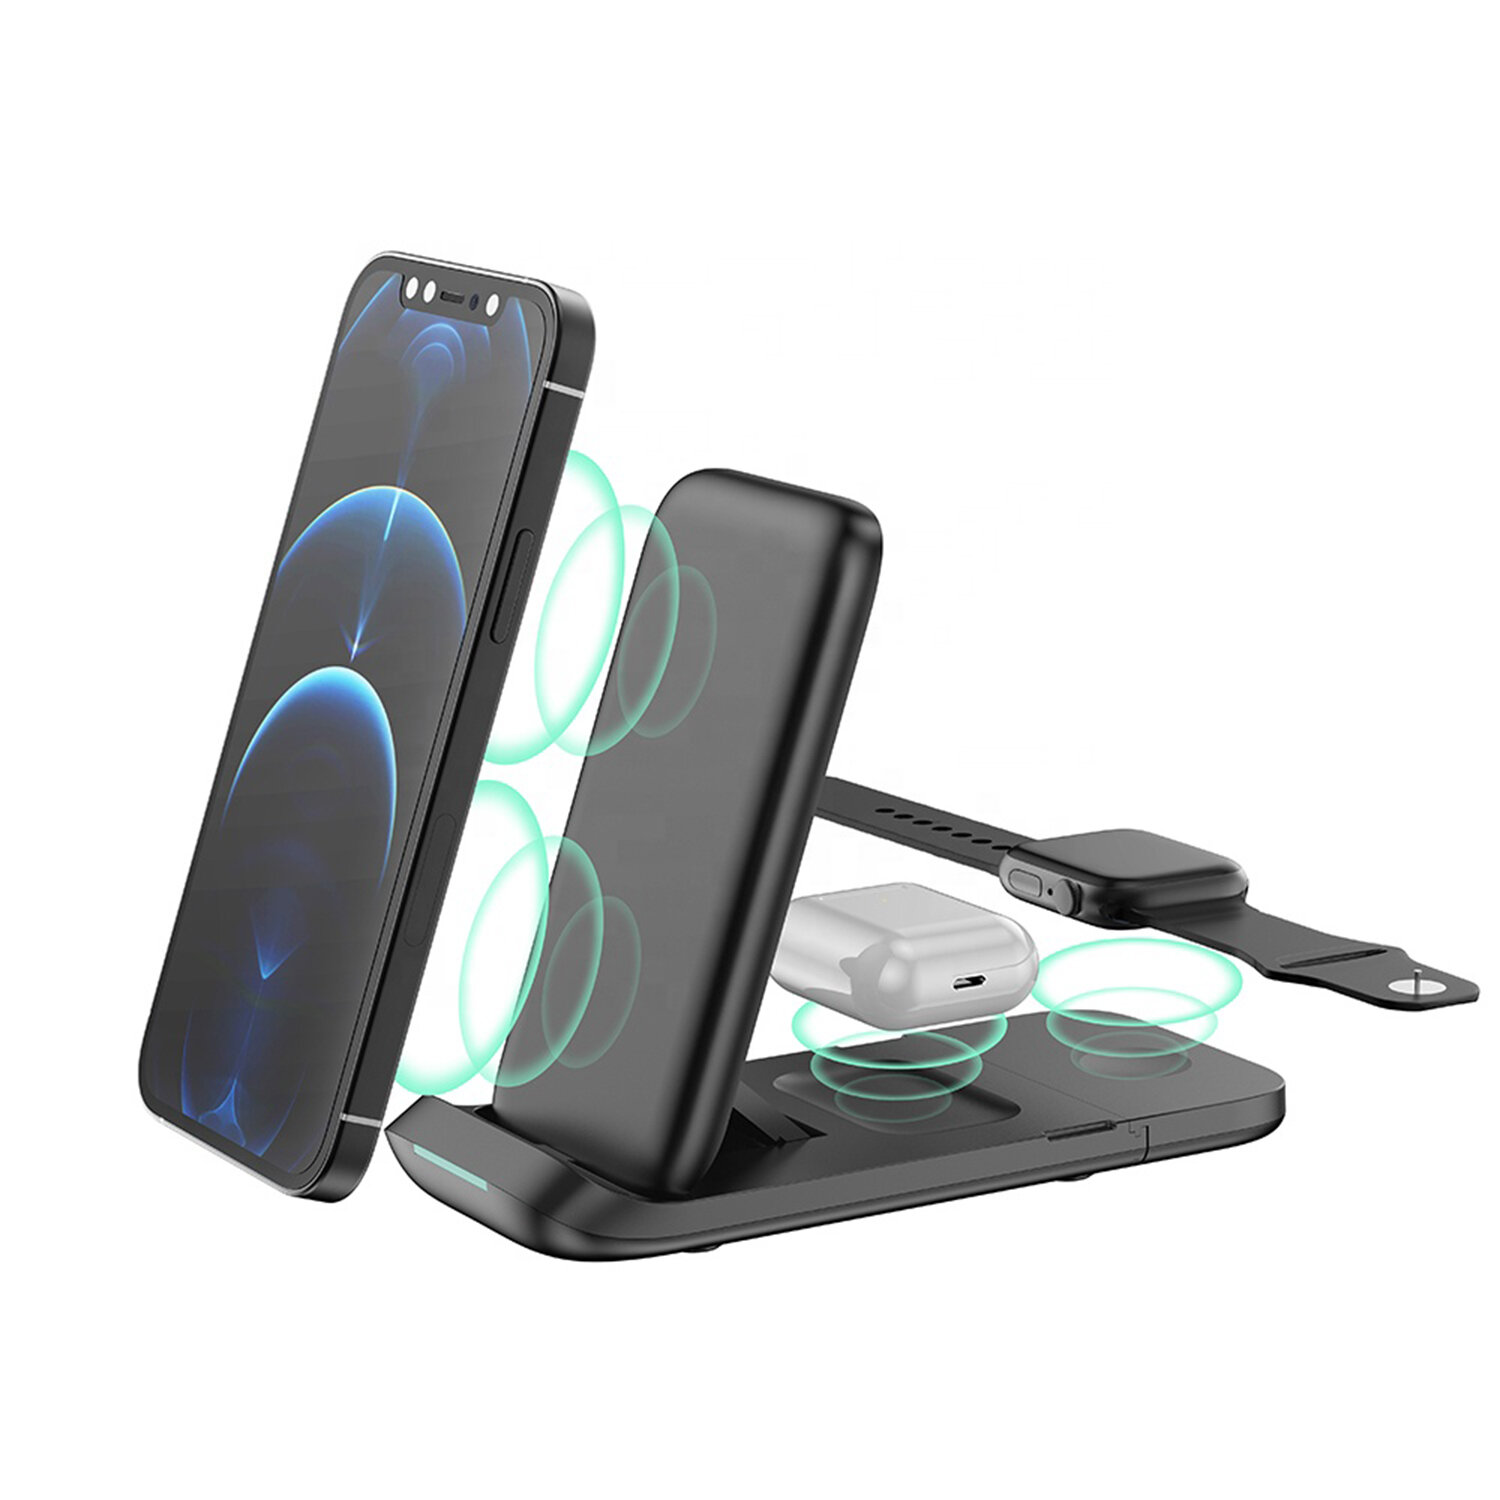 Bakeey HS-V8 Folding 3-in-1 Wireless Charger 15W Fast Charging Vertical Stand For iPhone 13 Pro Max For Samsung Galaxy Z